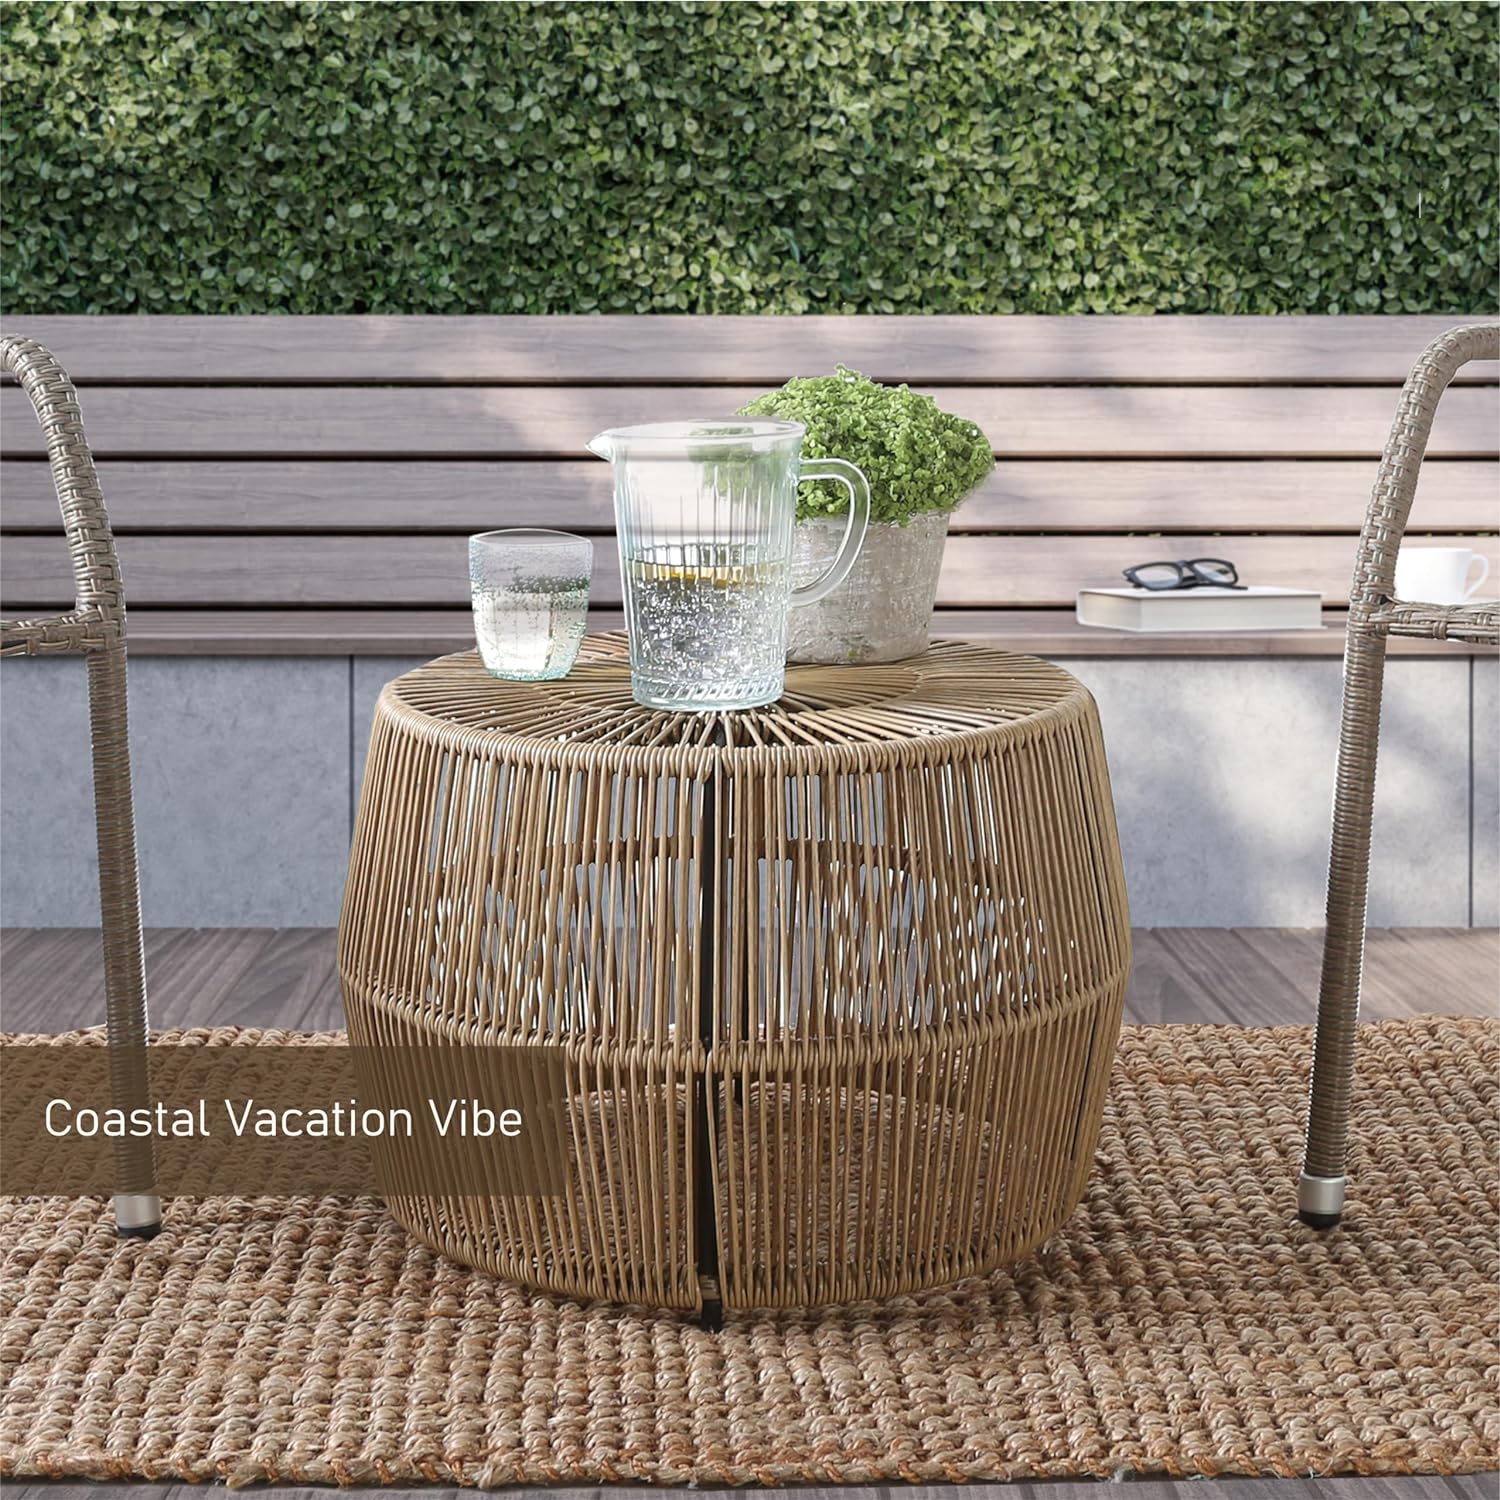 Muse Lounge Co. Ysar Boho Rattan Round Coffee Table Outdoor with Metal Frame All Weather and Rust Resistant